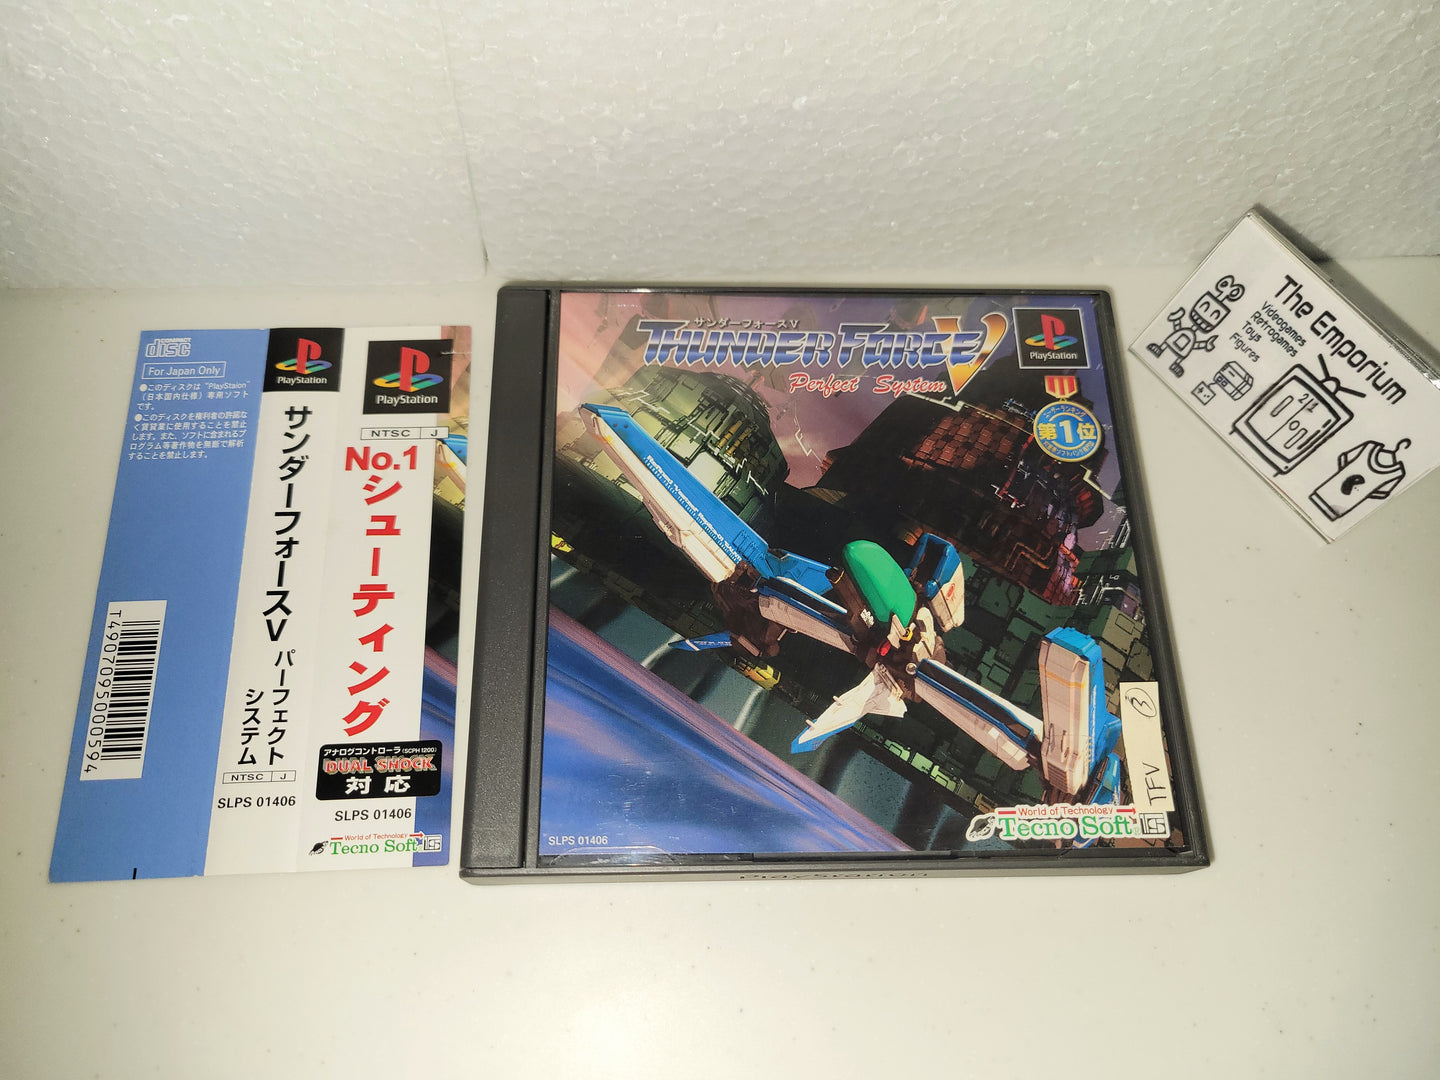 Thunder Force V: Perfect System - Sony PS1 Playstation